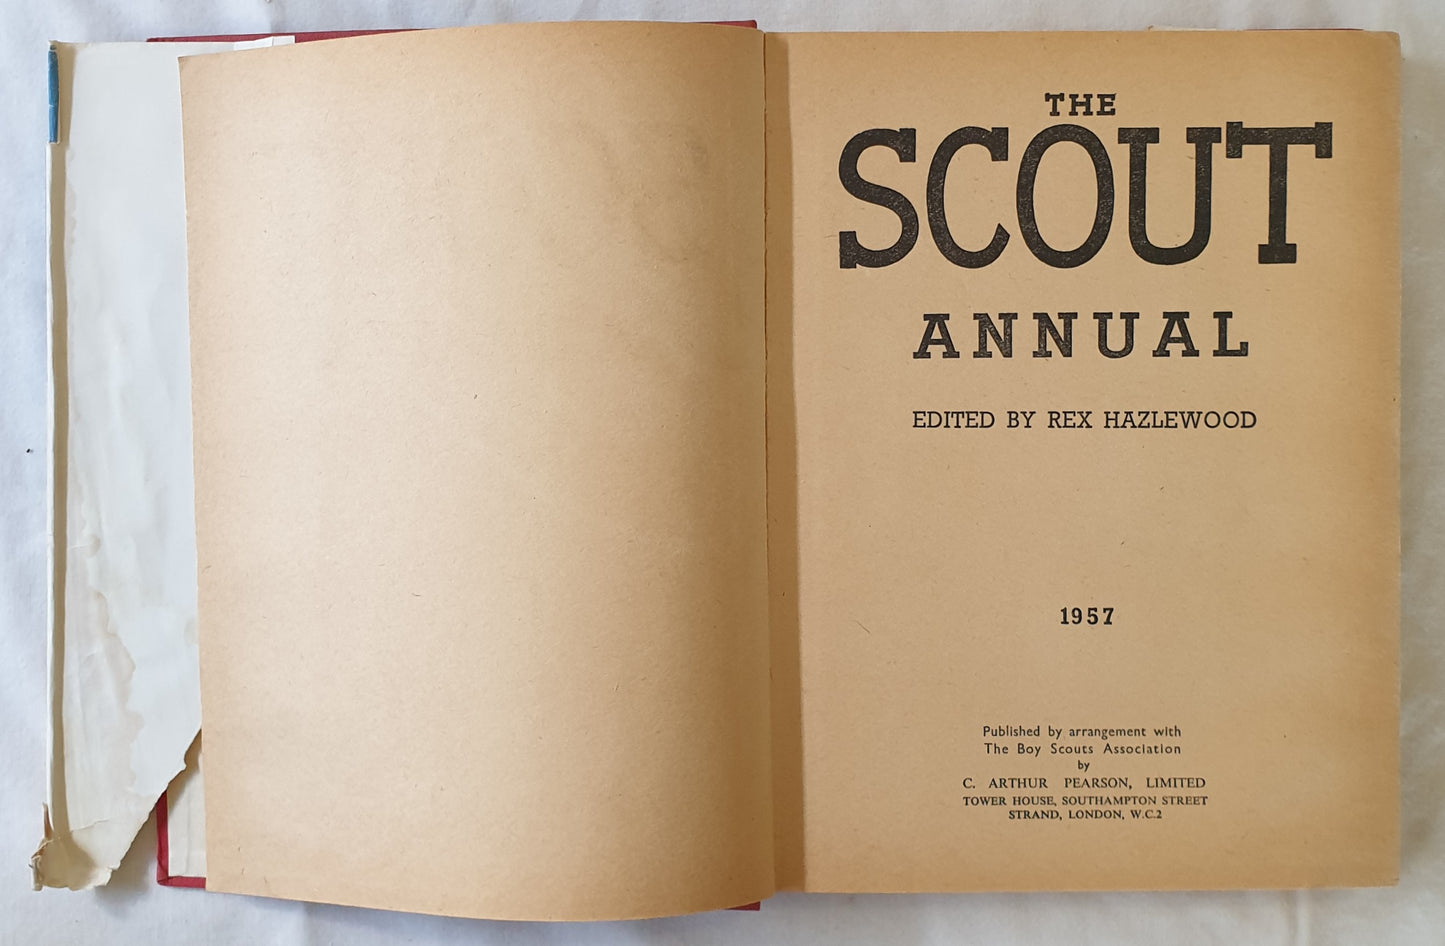 The Scout Annual Edited by Rex Hazlewood